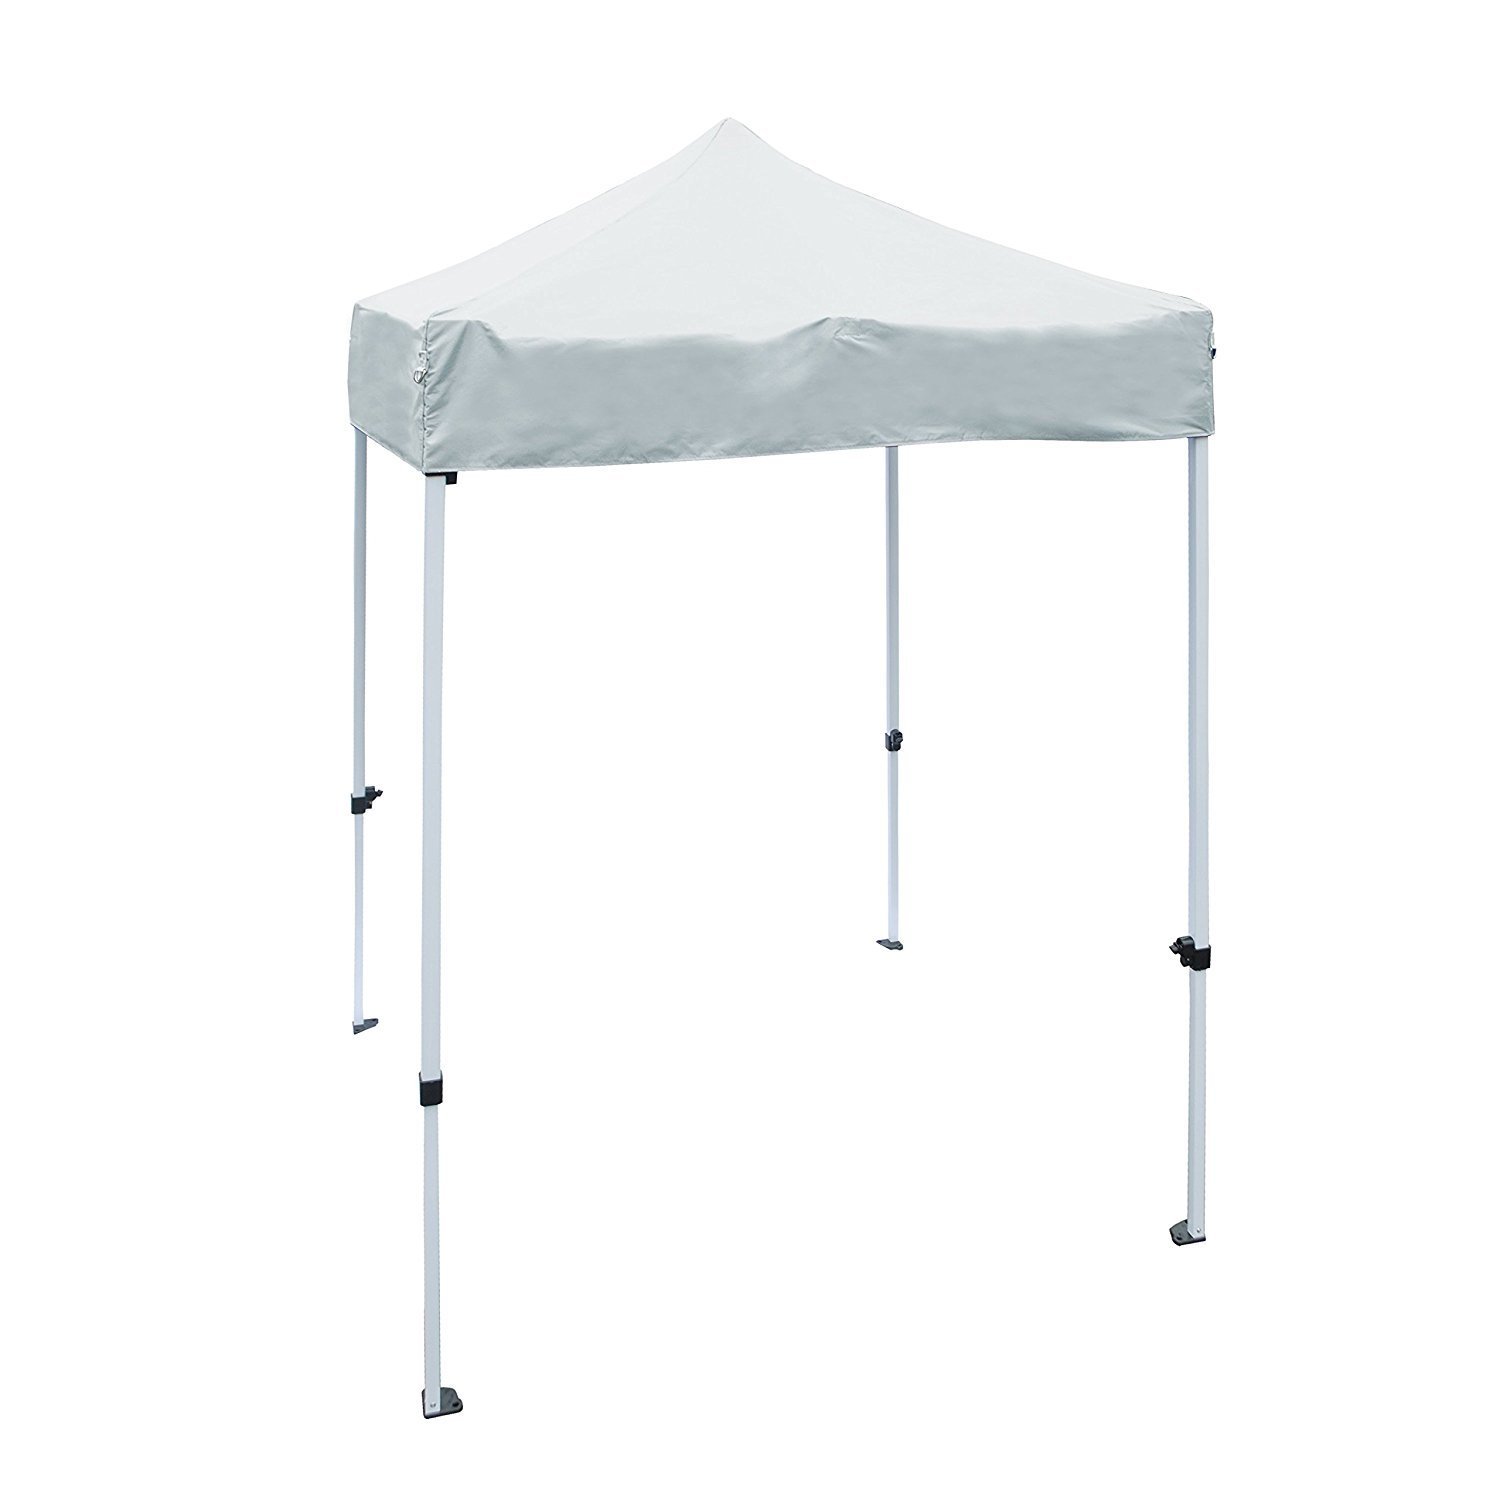 ALEKO Waterproof Gazebo Tent Canopy For Outdoor Events Picnic Party White Color